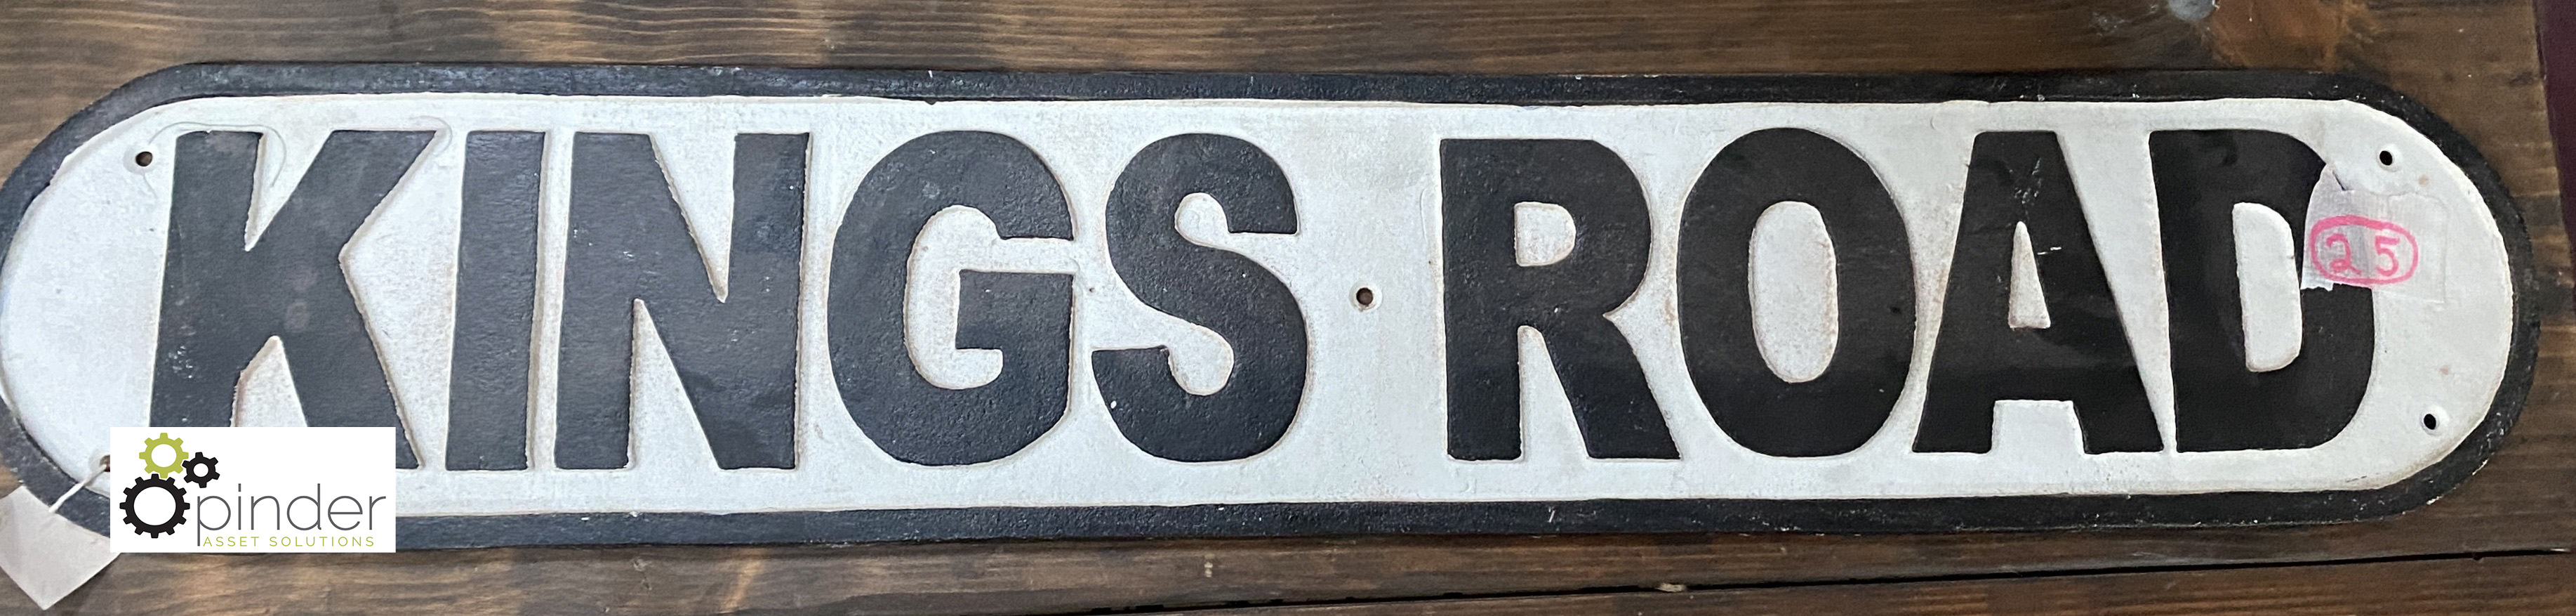 Reproduction ‘Kings Road’ Street Sign, 150mm high x 790mm long - Image 2 of 3